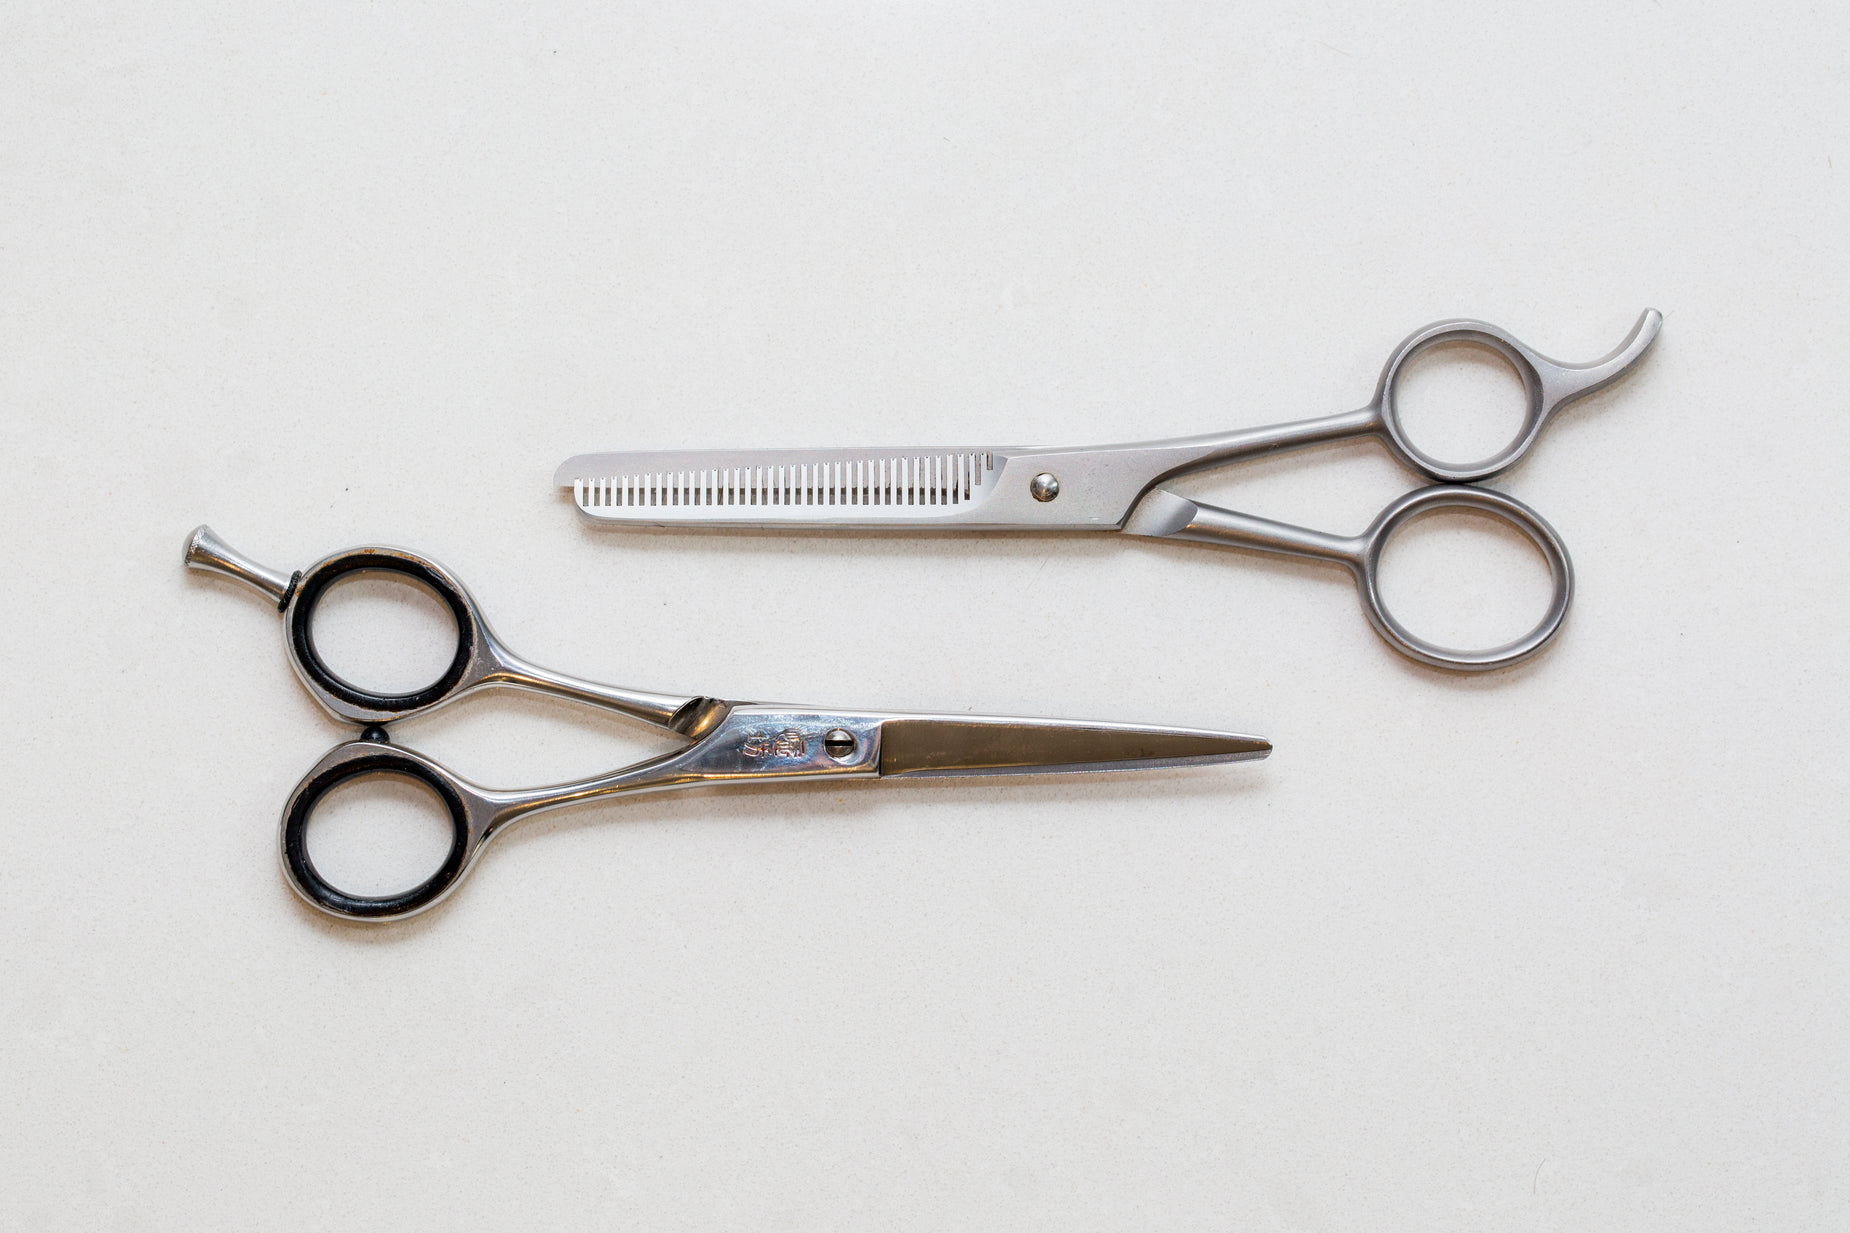 pair of scissors and comb lying on white background